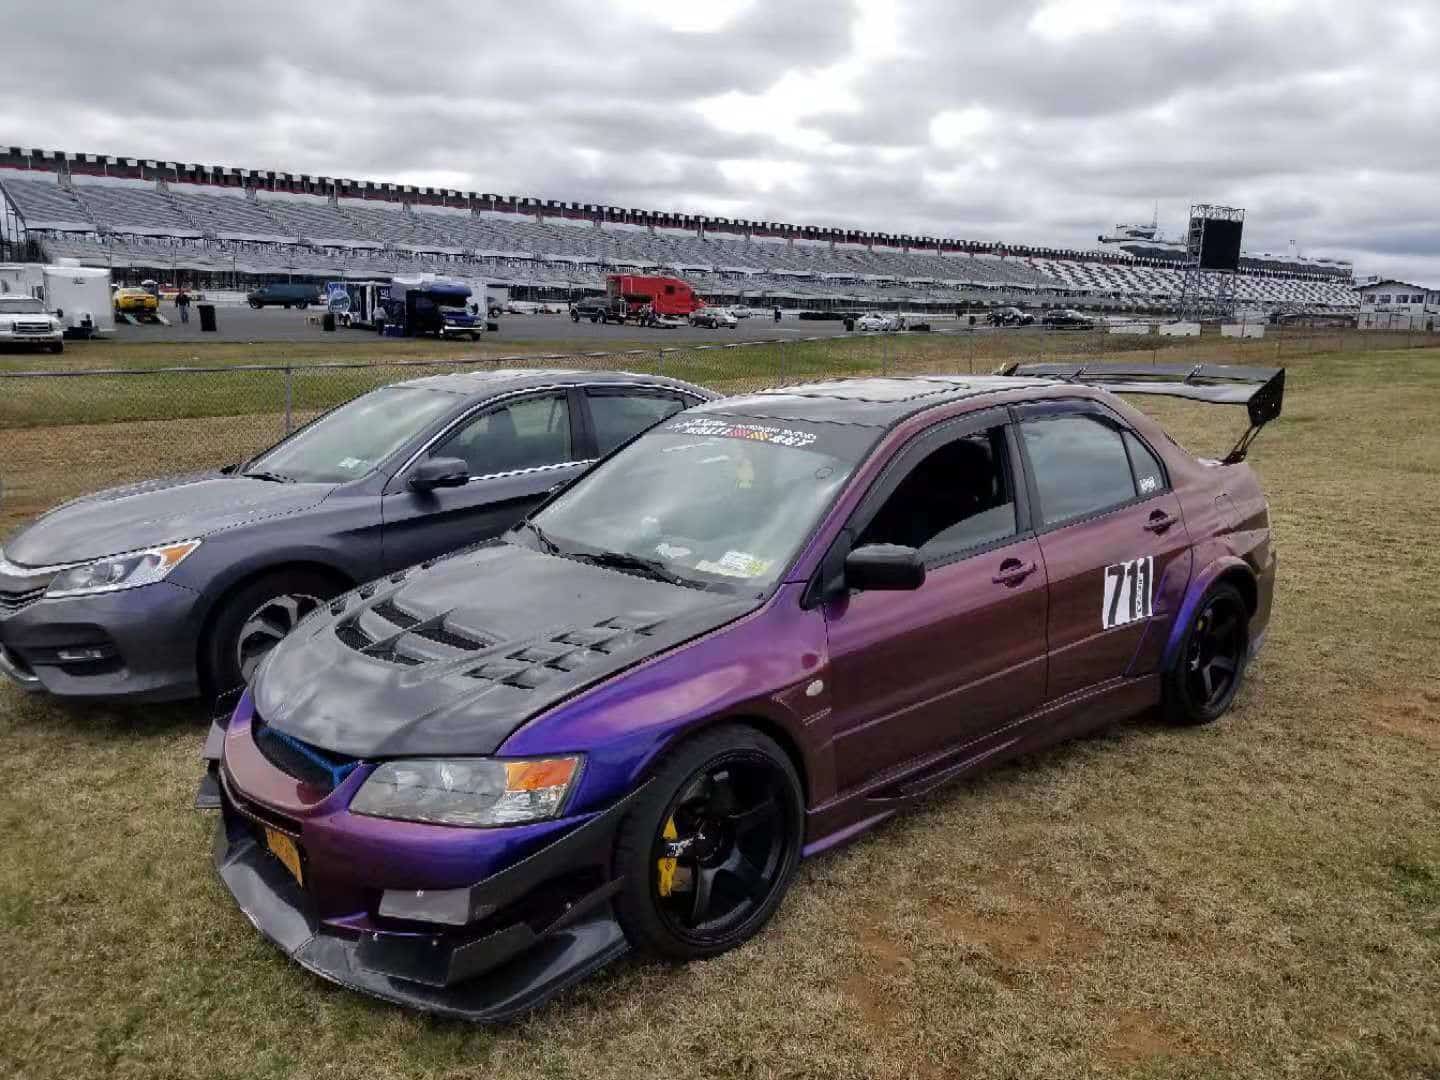 2003 Mitsubishi Lancer Evolution - Part out the car 2005 evo 8 only pick up only (11378) - Accessories - $1 - Maspeth, NY 11378, United States